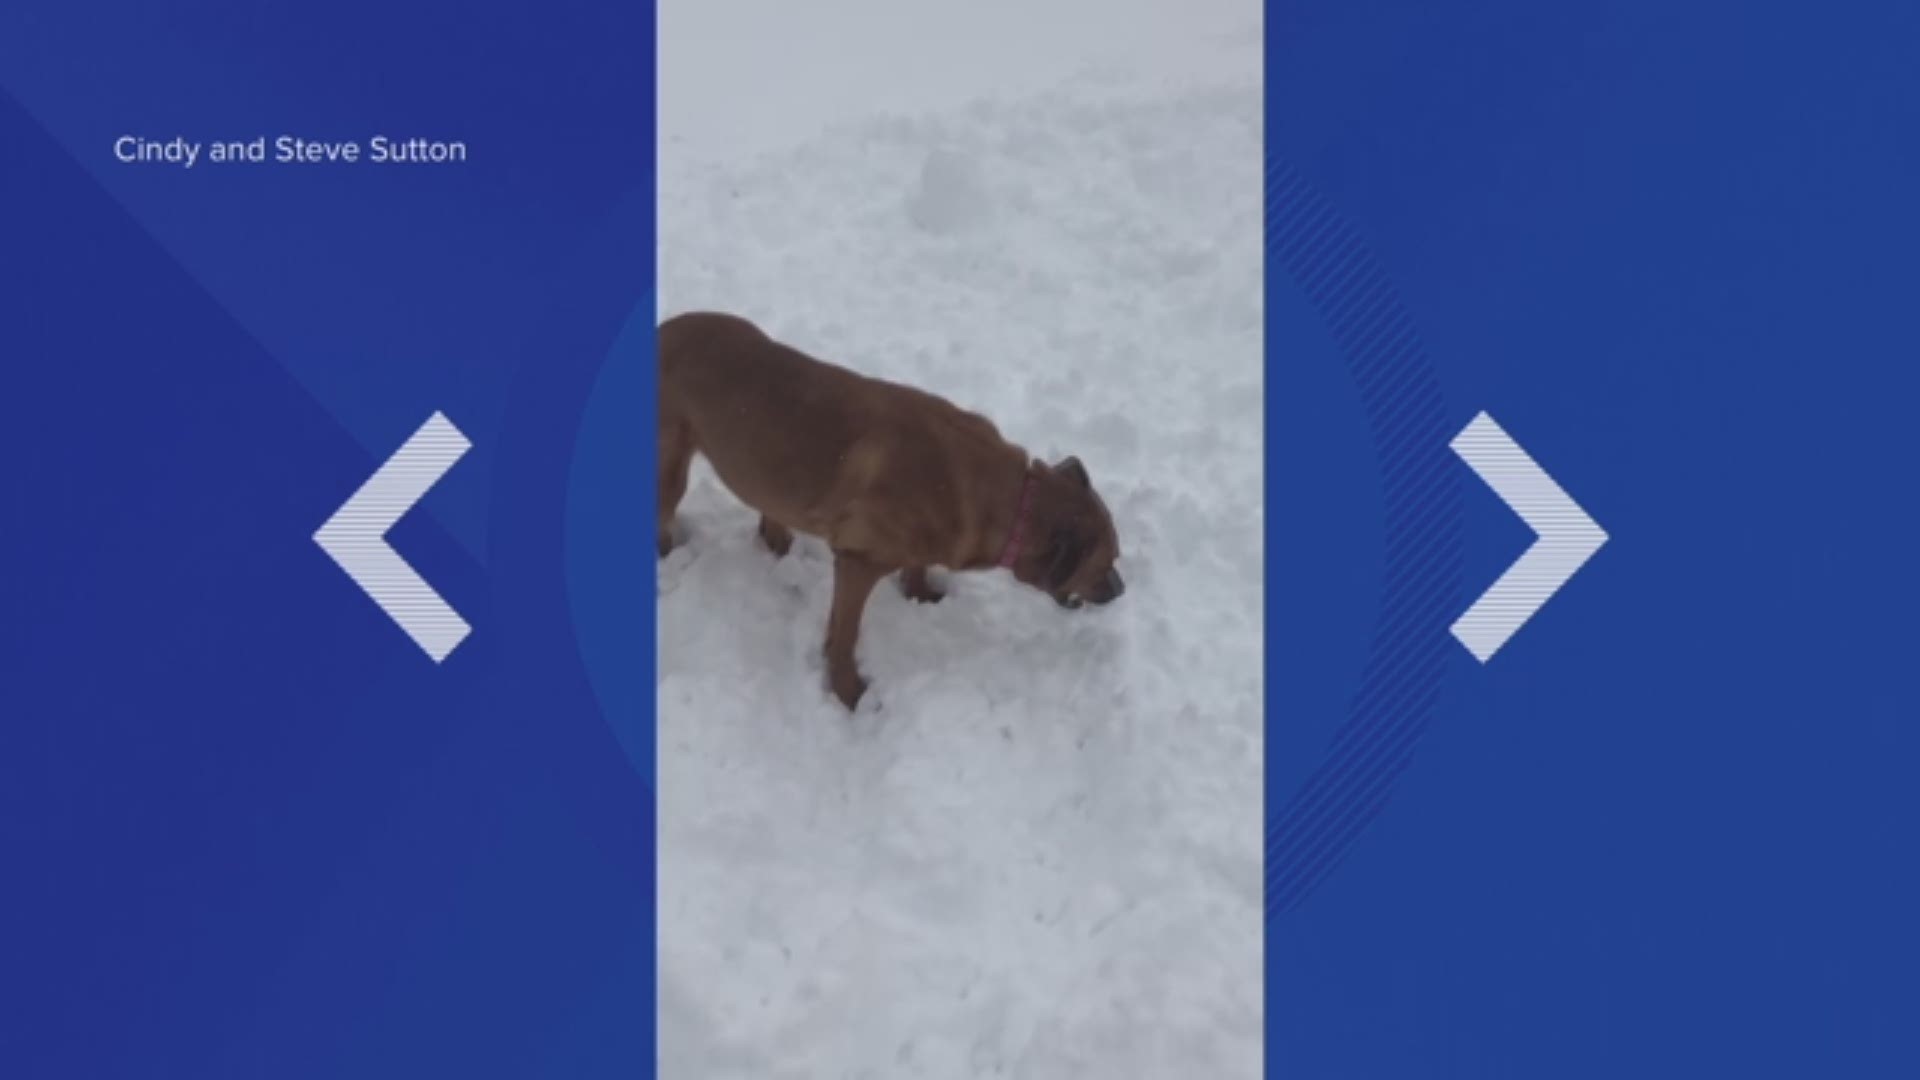 A dog catches a snowball during a winter storm in Arizona.